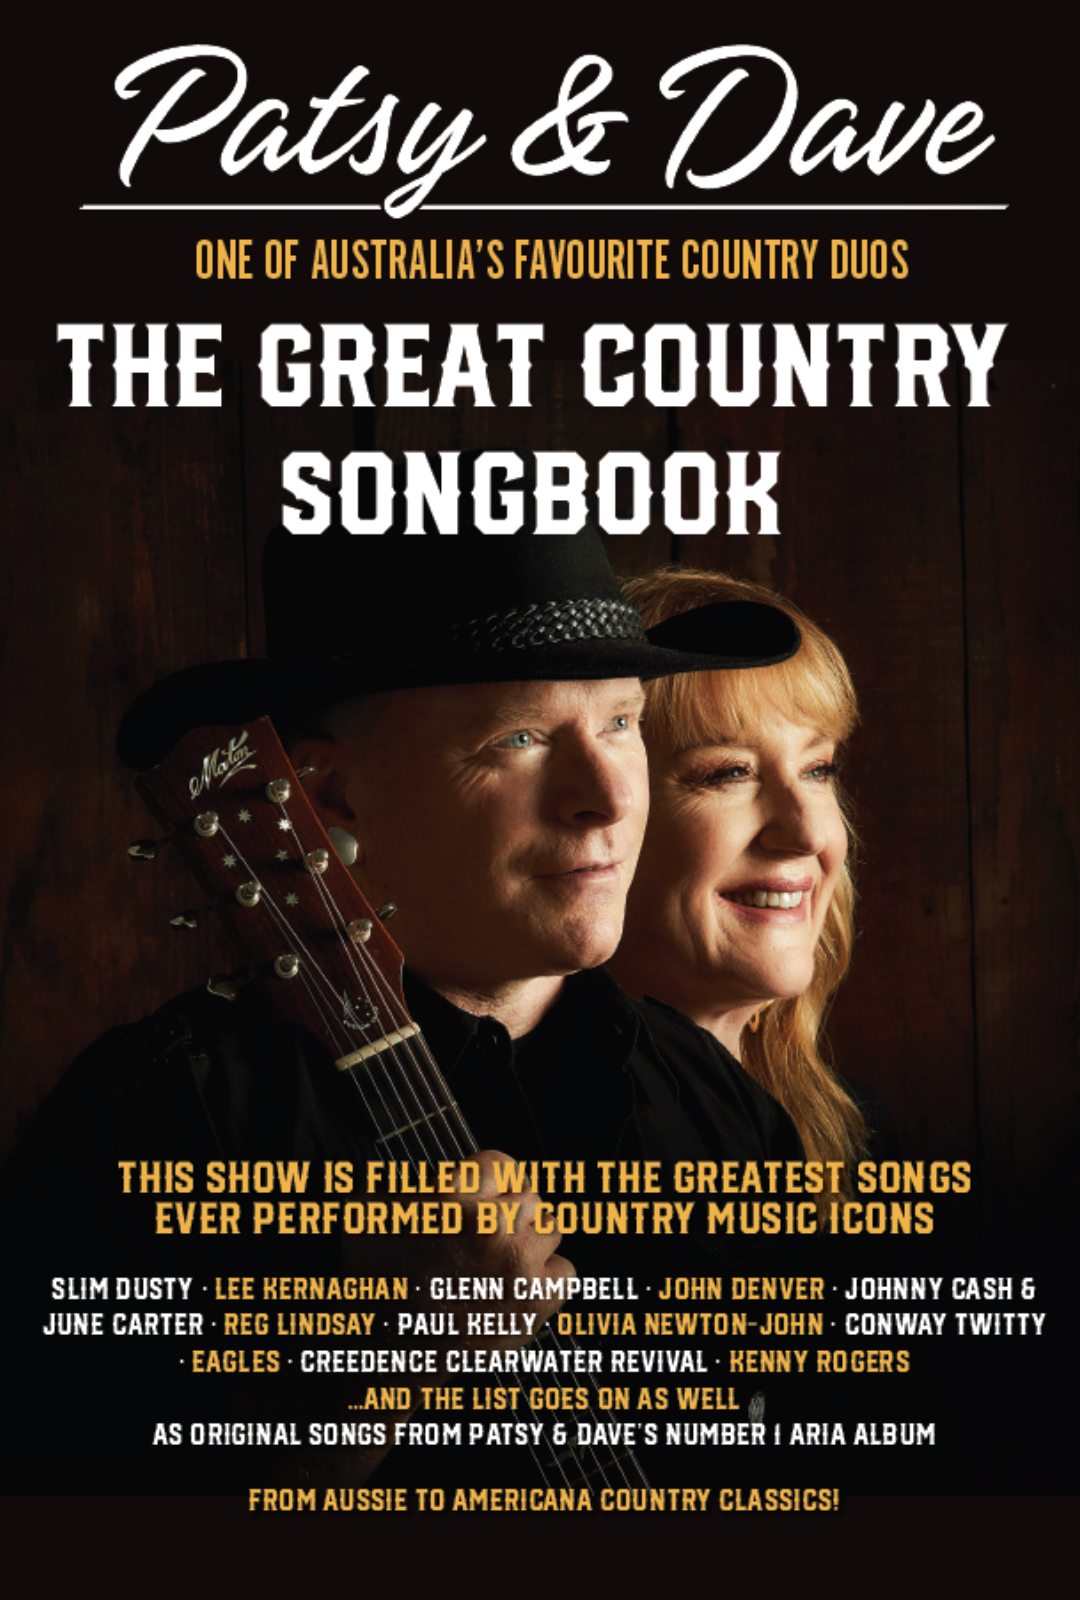 Patsy & Dave - The Great Country Songbook